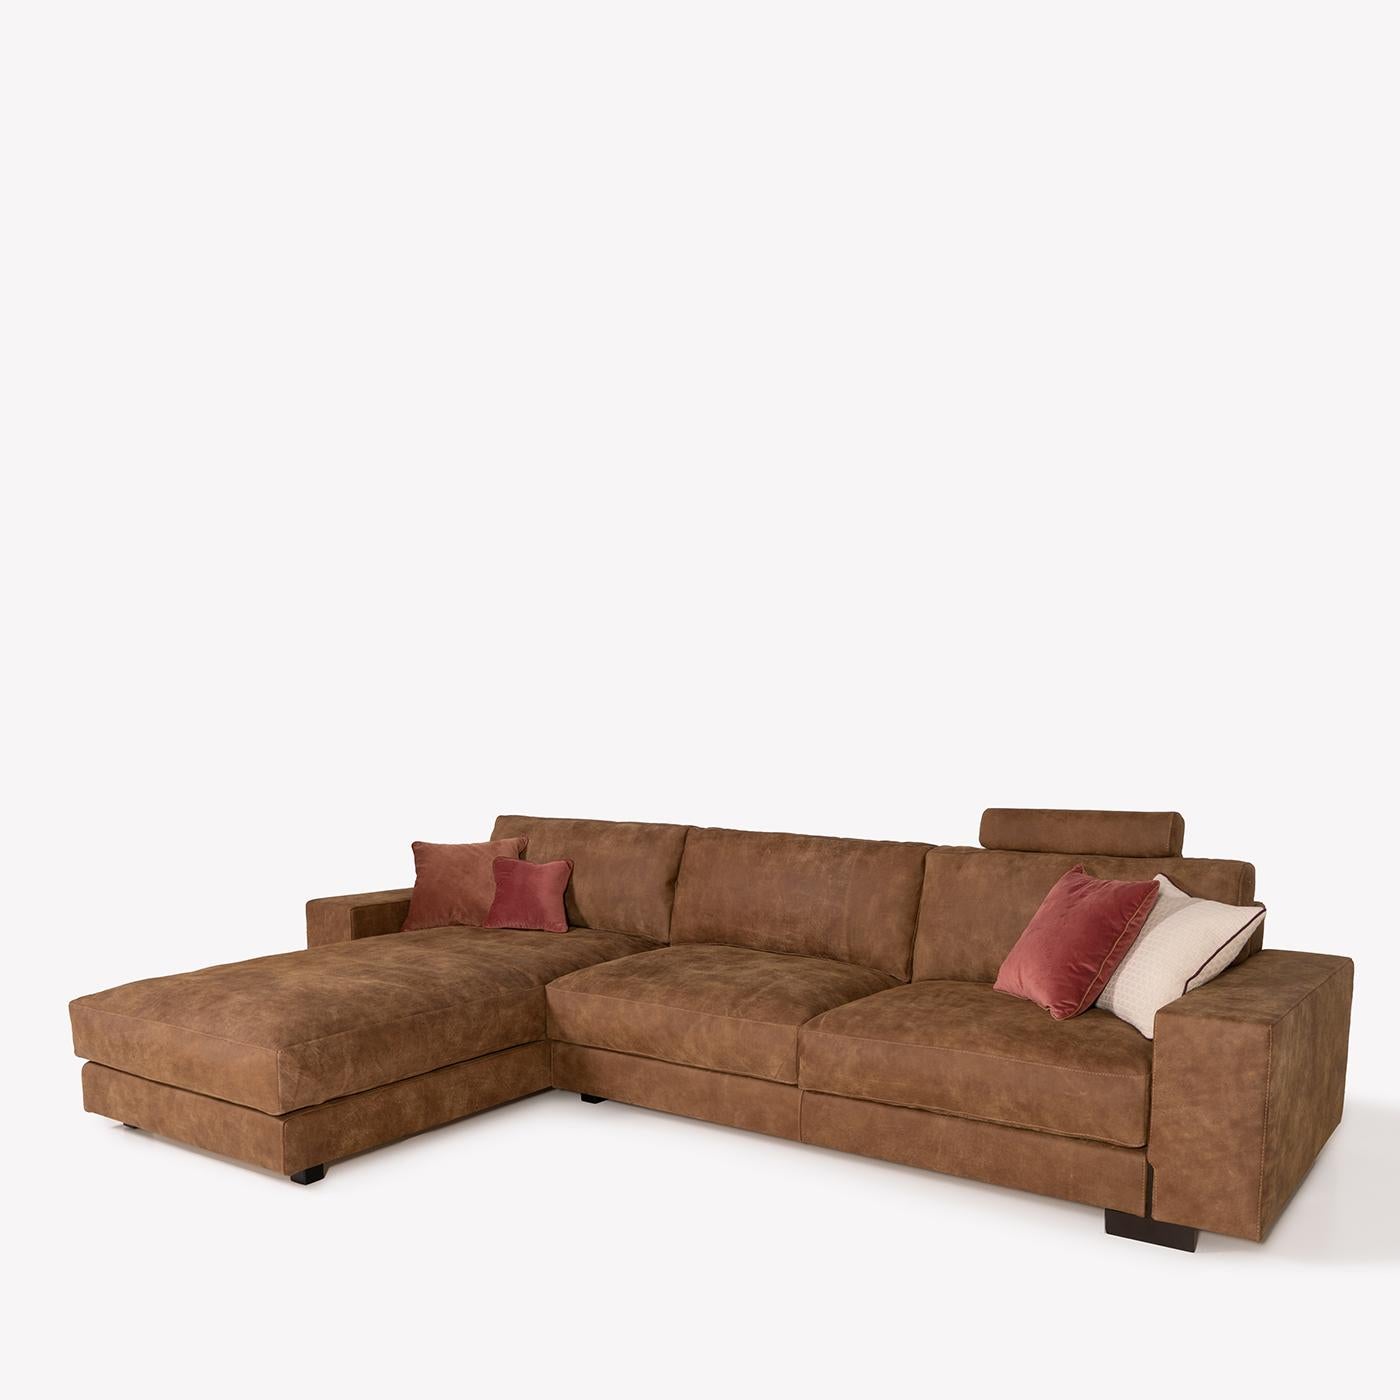 The You Glam sofa, from Tribeca Collection, is the quintessence of the contemporary modular sofa, which can be really composed in infinite variations of dimensions and solutions. It is a very rigorous sofa, geometric in the frame, but soft in the